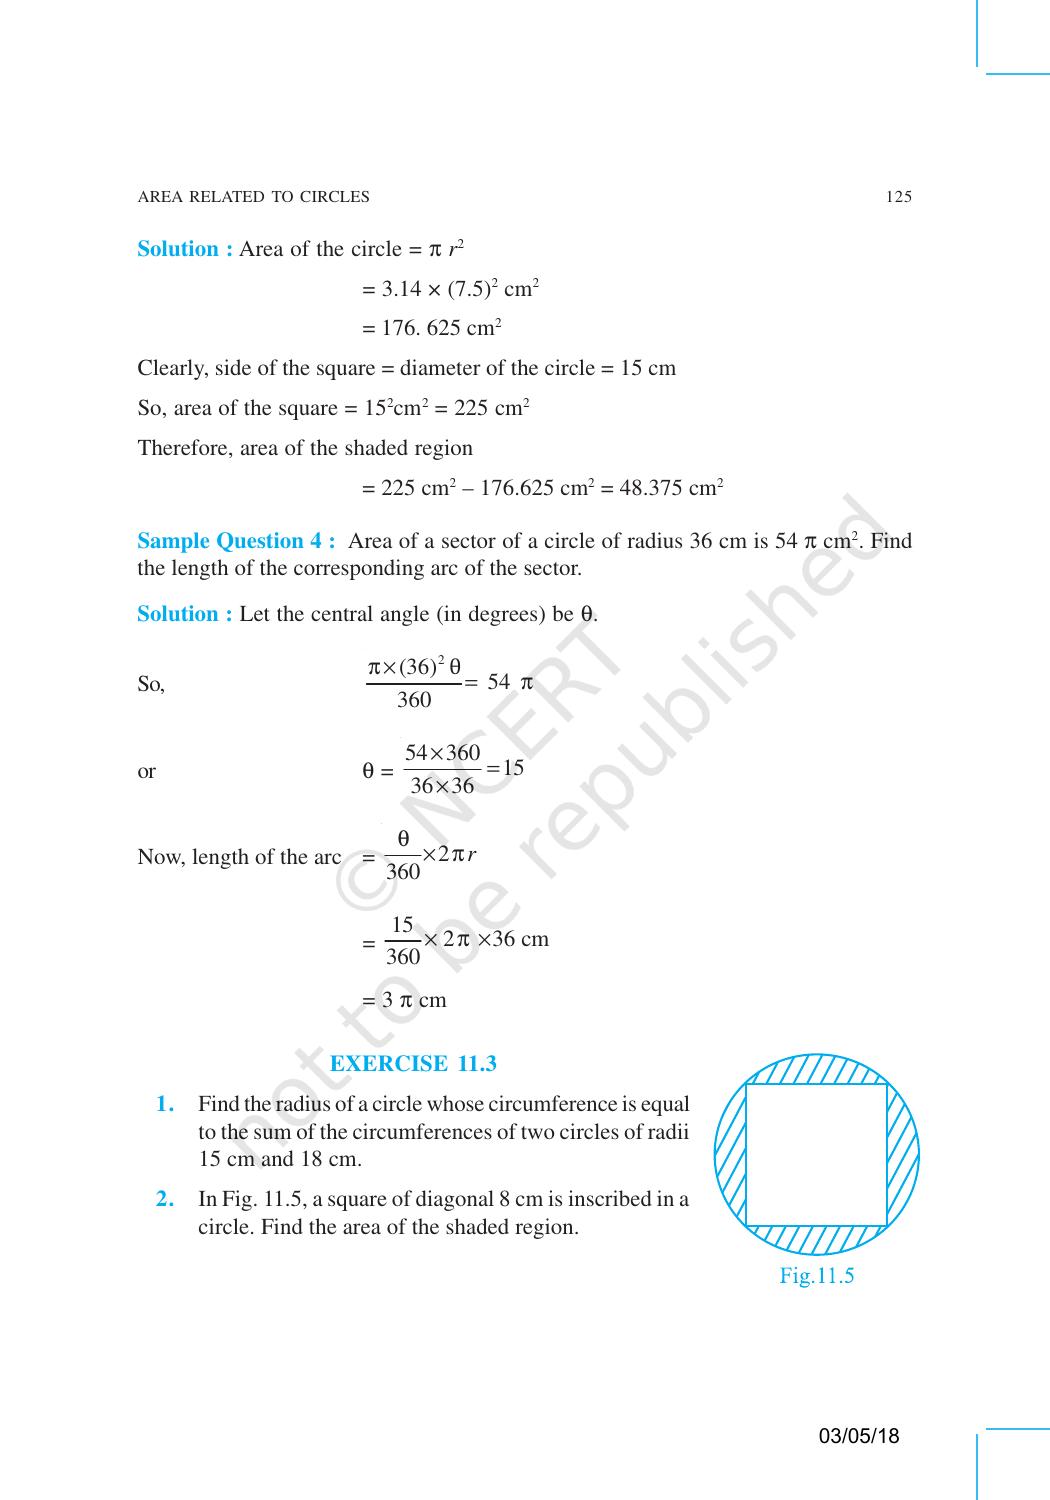 NCERT Exemplar Book for Class 10 Maths: Chapter 11 Areas related to Circles - Page 7